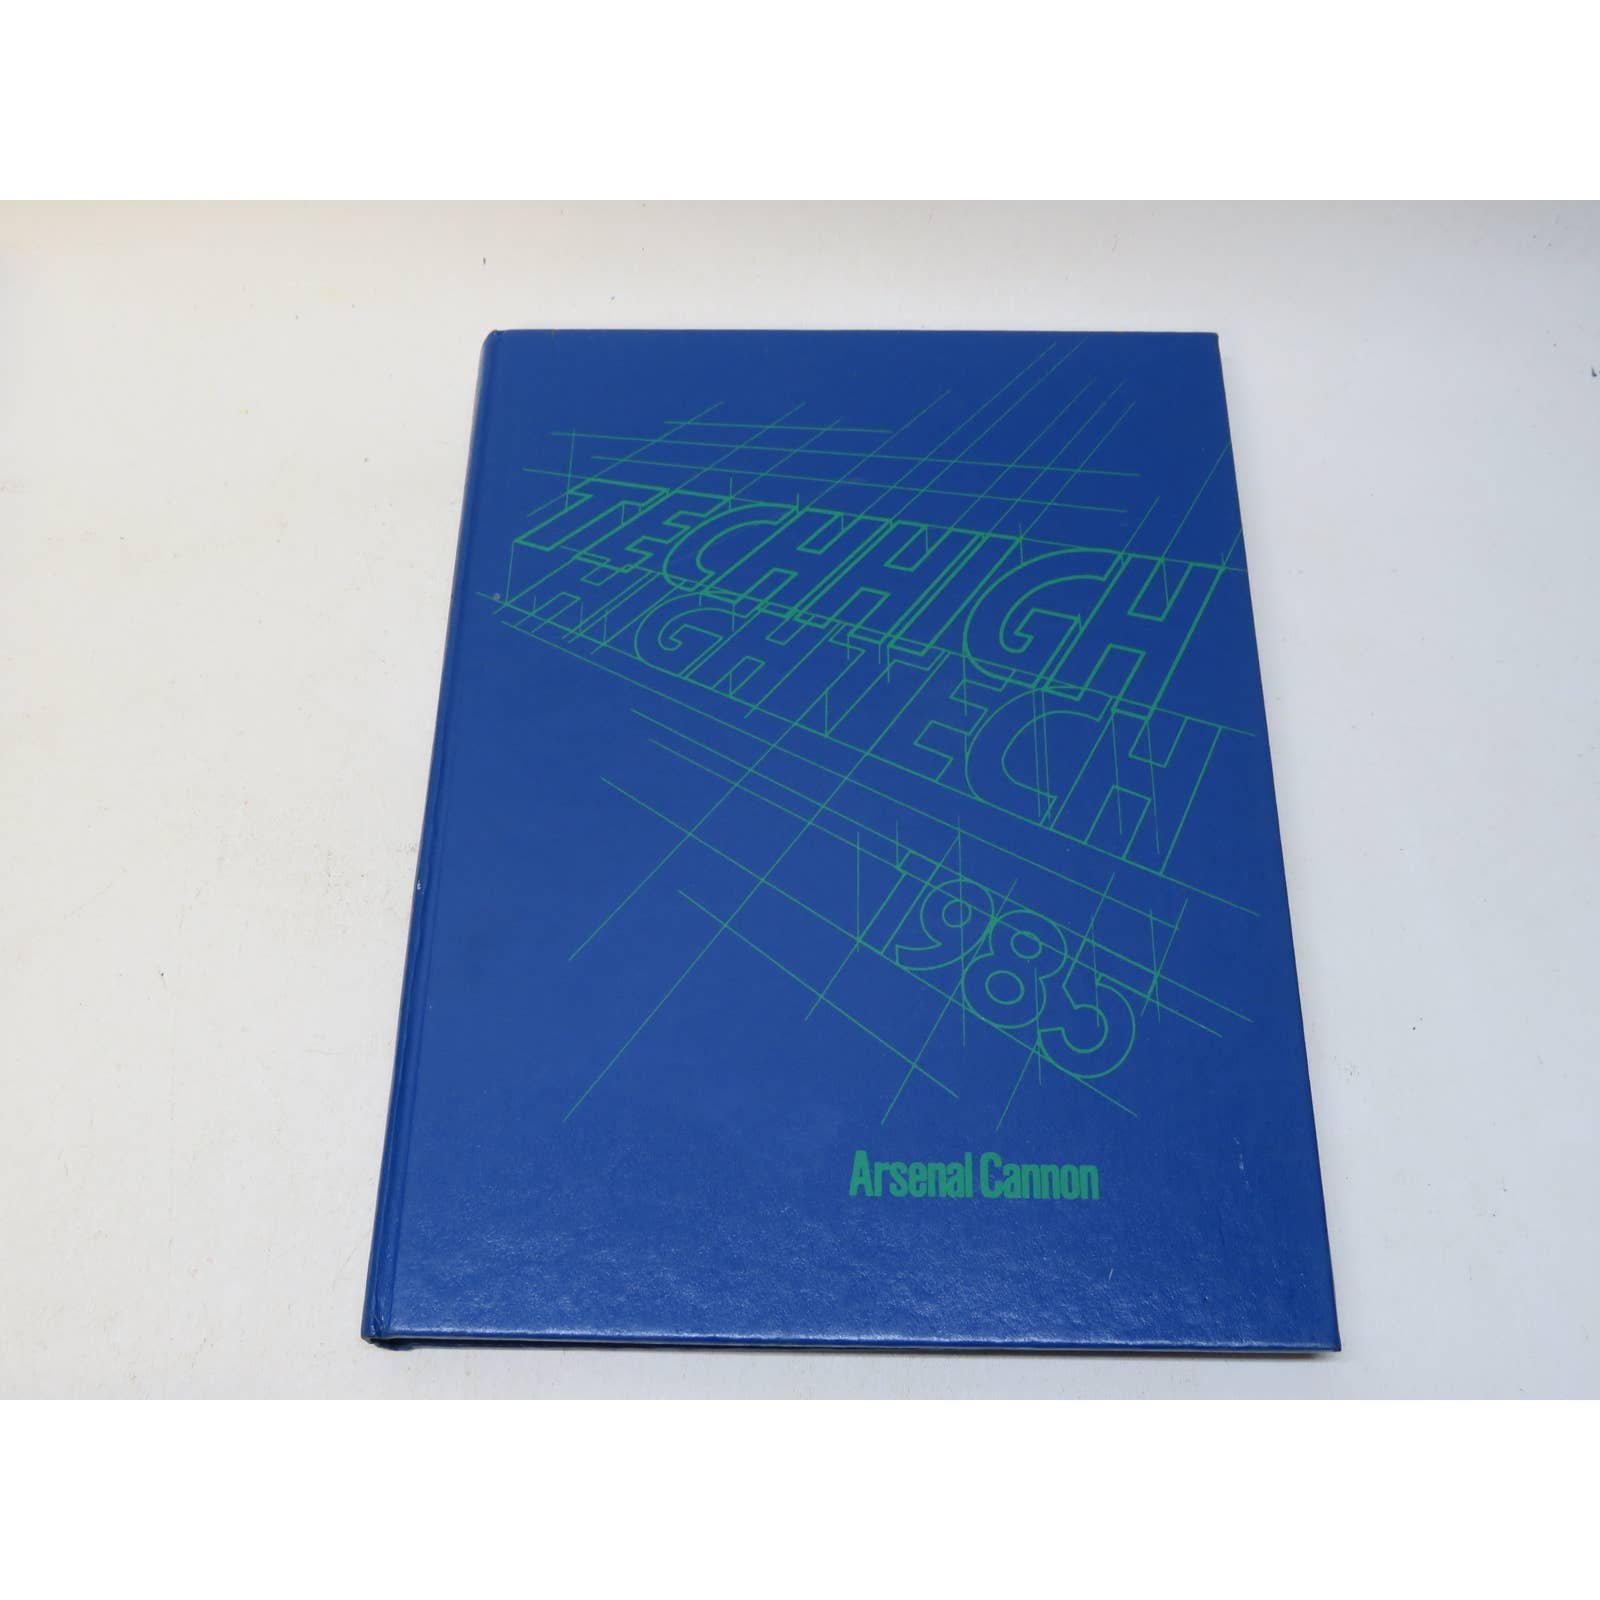 1985 Arsenal Technical High School Indiana Yearbook Annual gZvMBSsnS